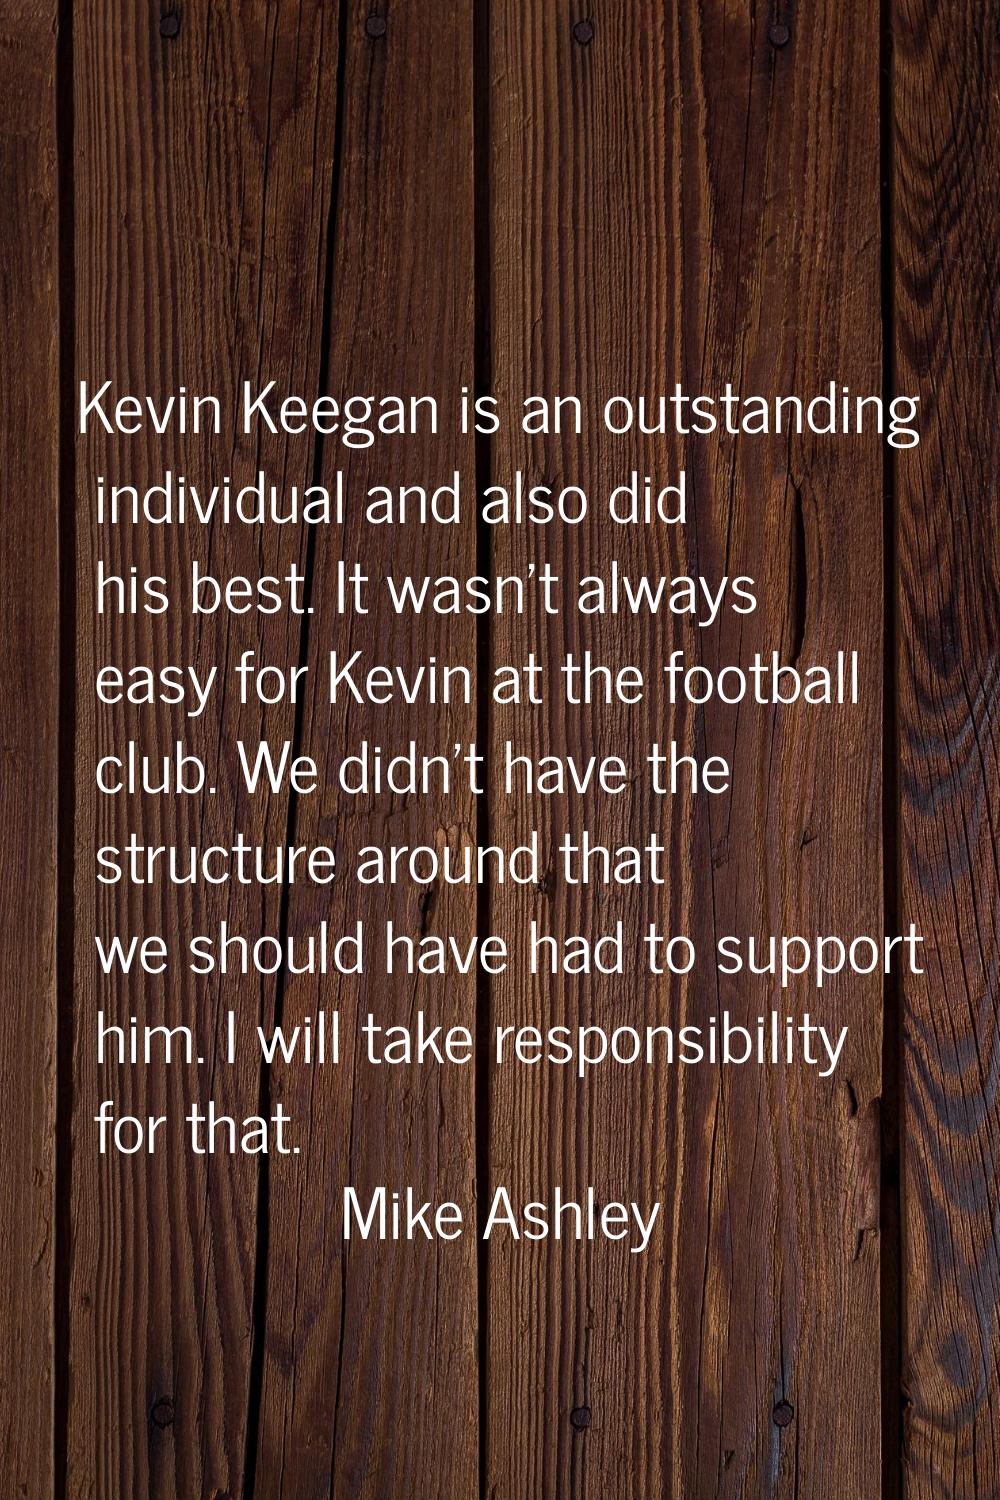 Kevin Keegan is an outstanding individual and also did his best. It wasn't always easy for Kevin at